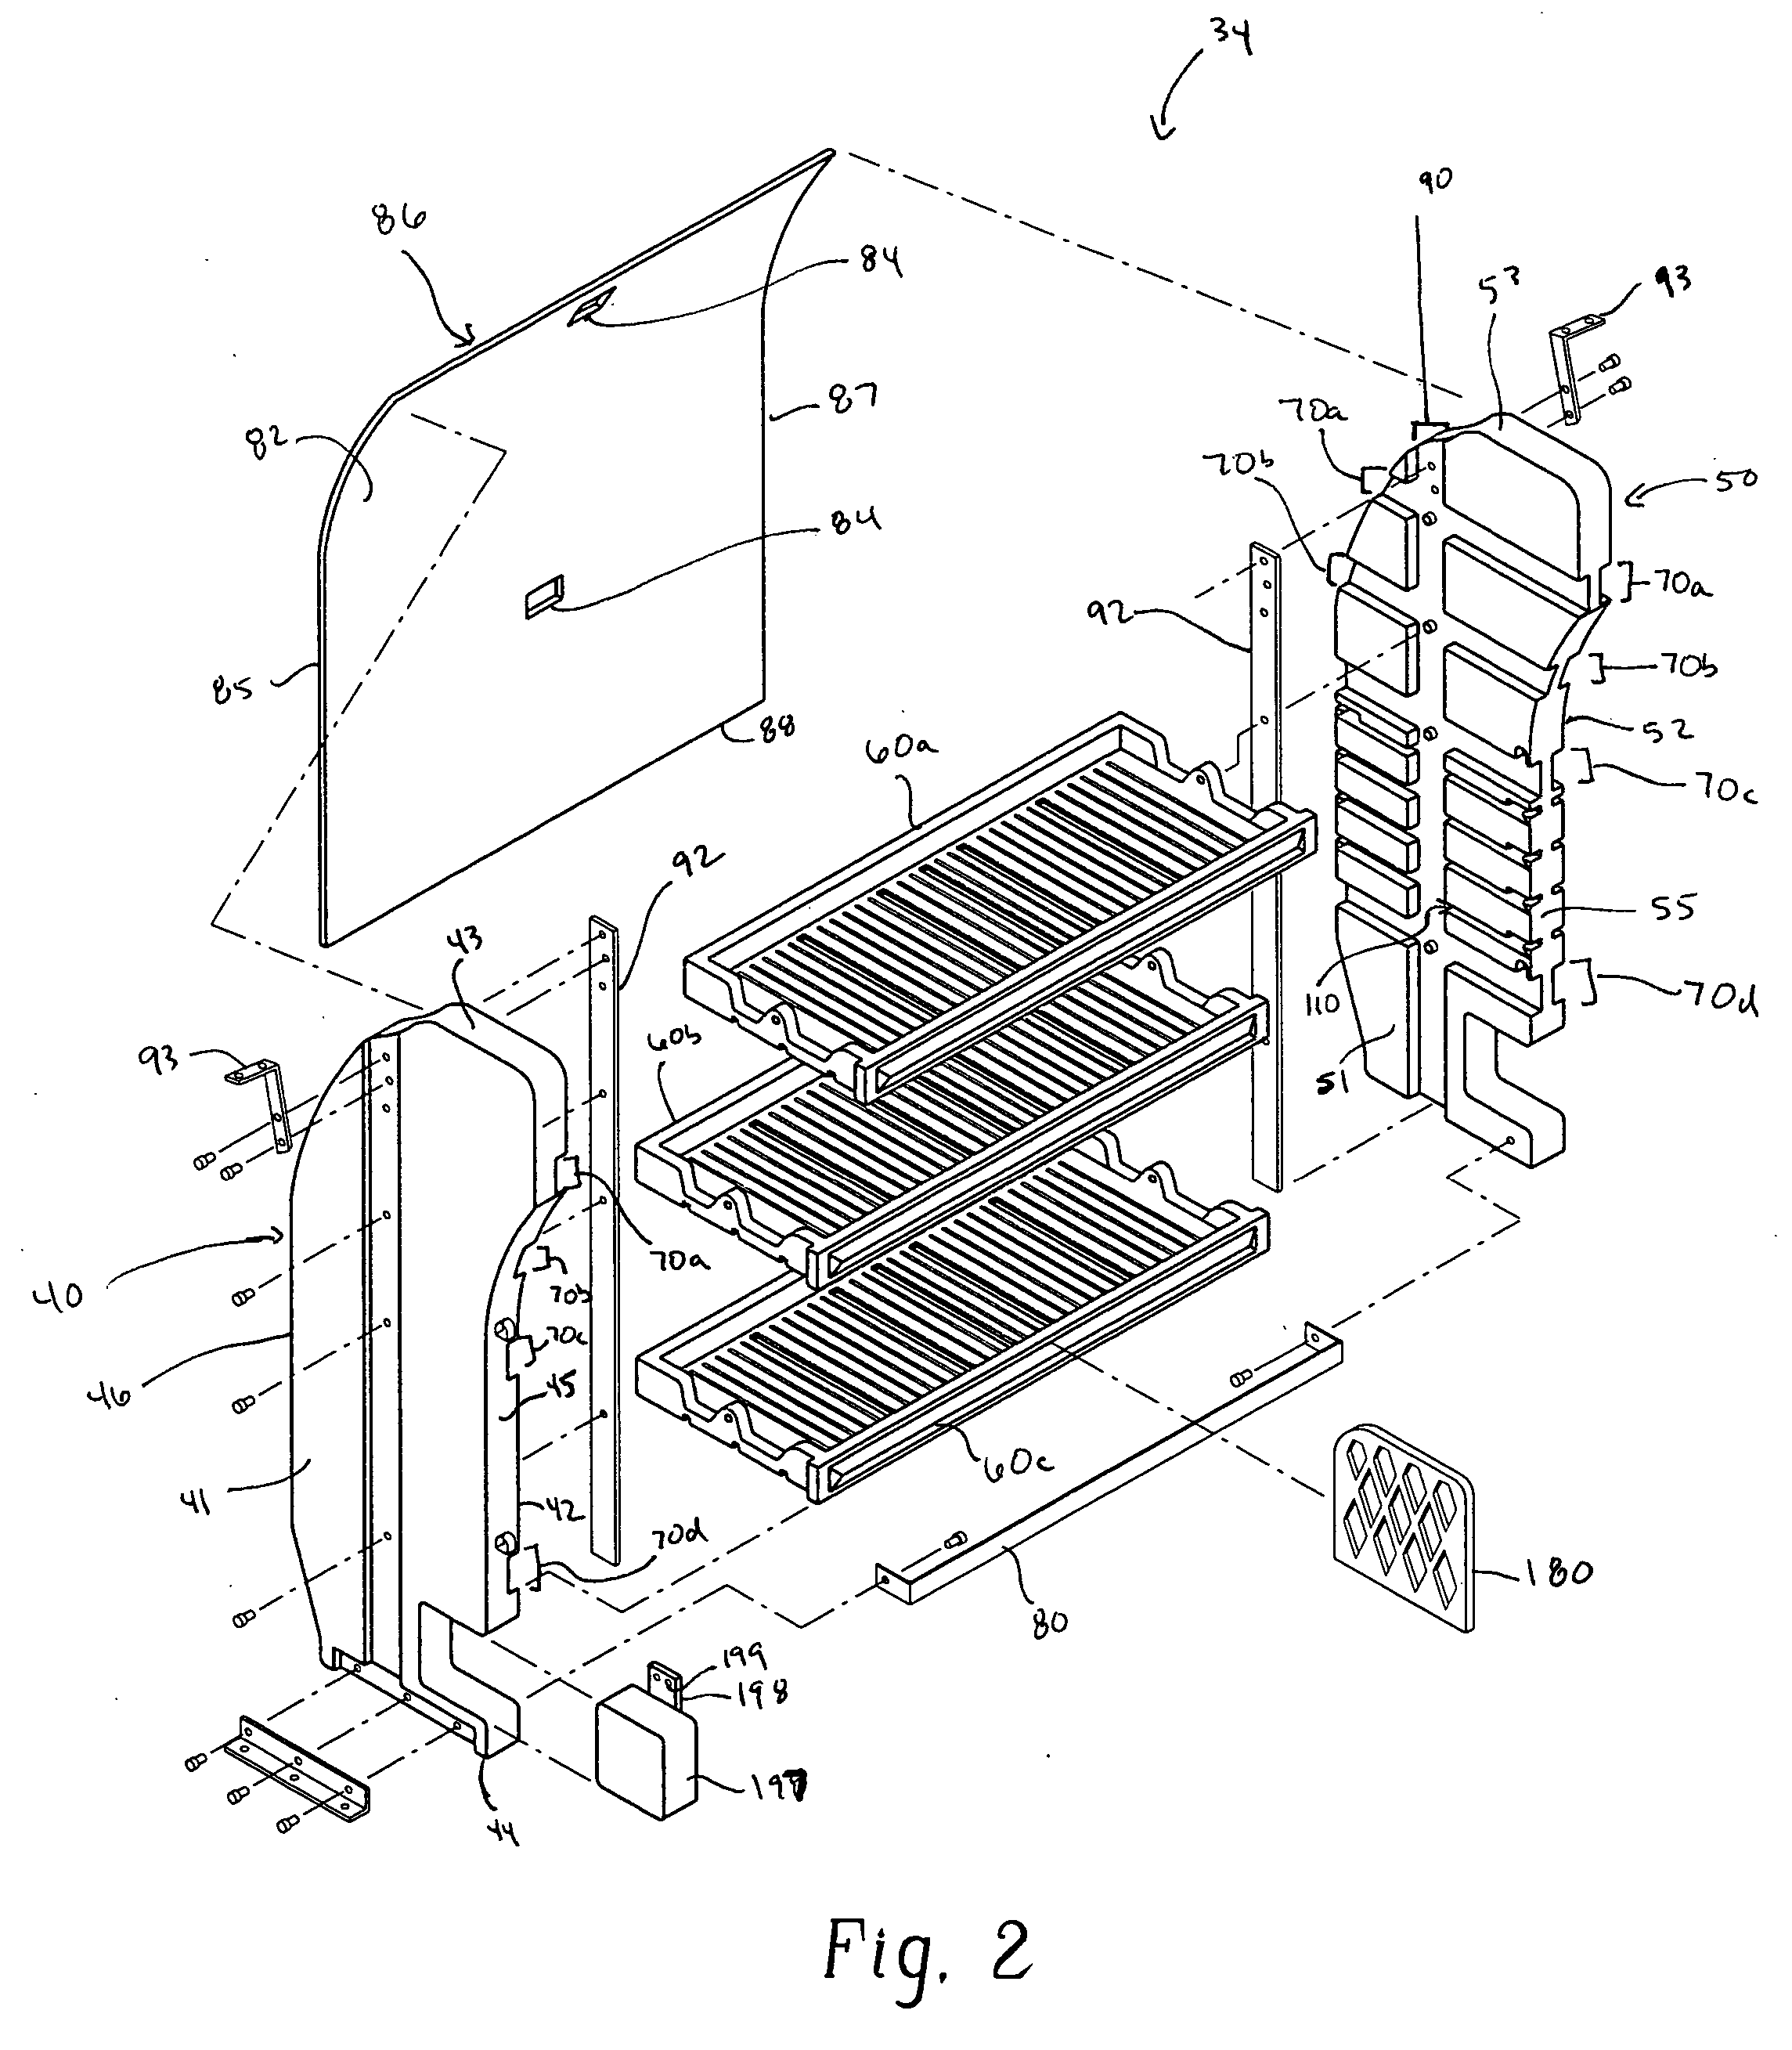 Adjustable shelving and storage system for vehicles